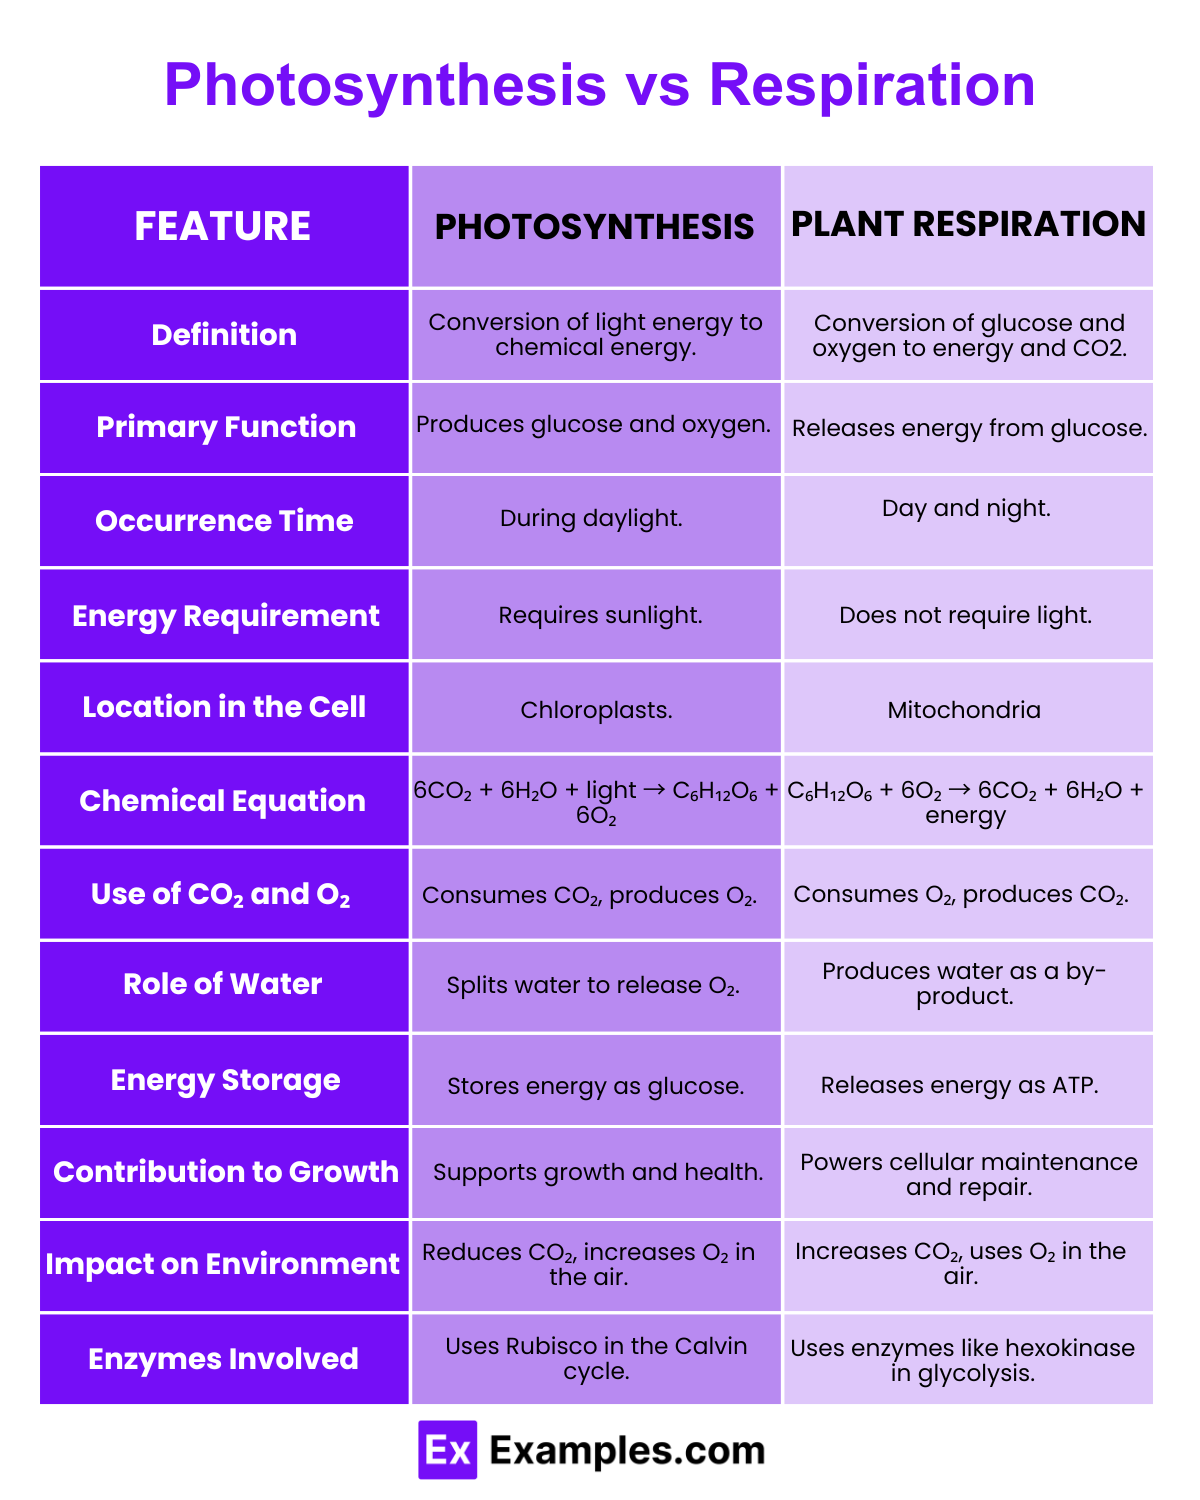 Differences Between Photosynthesis and Plant Respiration